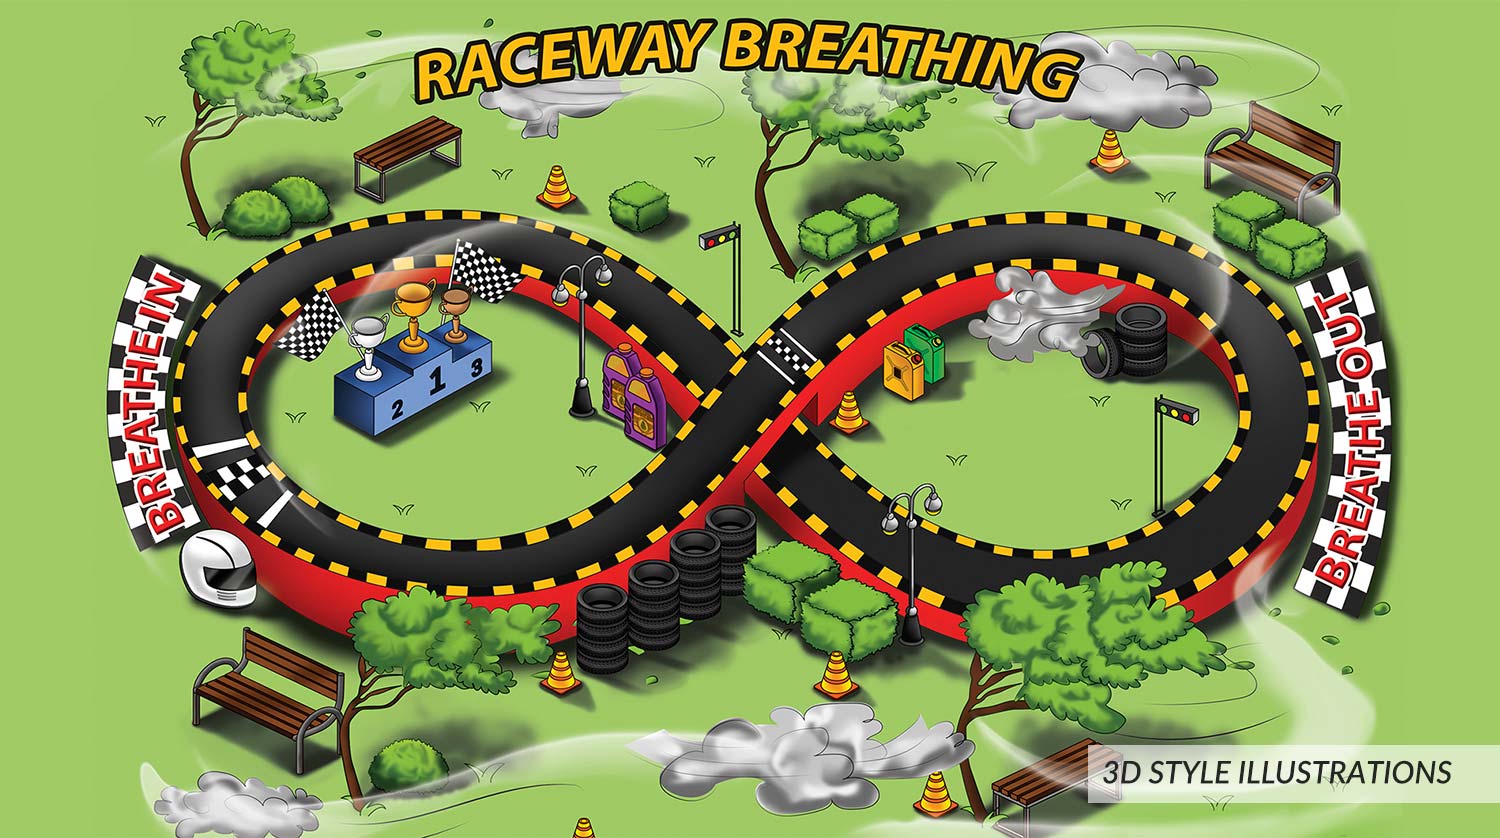 Coloured illustration of a car racing track, with tyres stacks on sides, benches and tree's also added